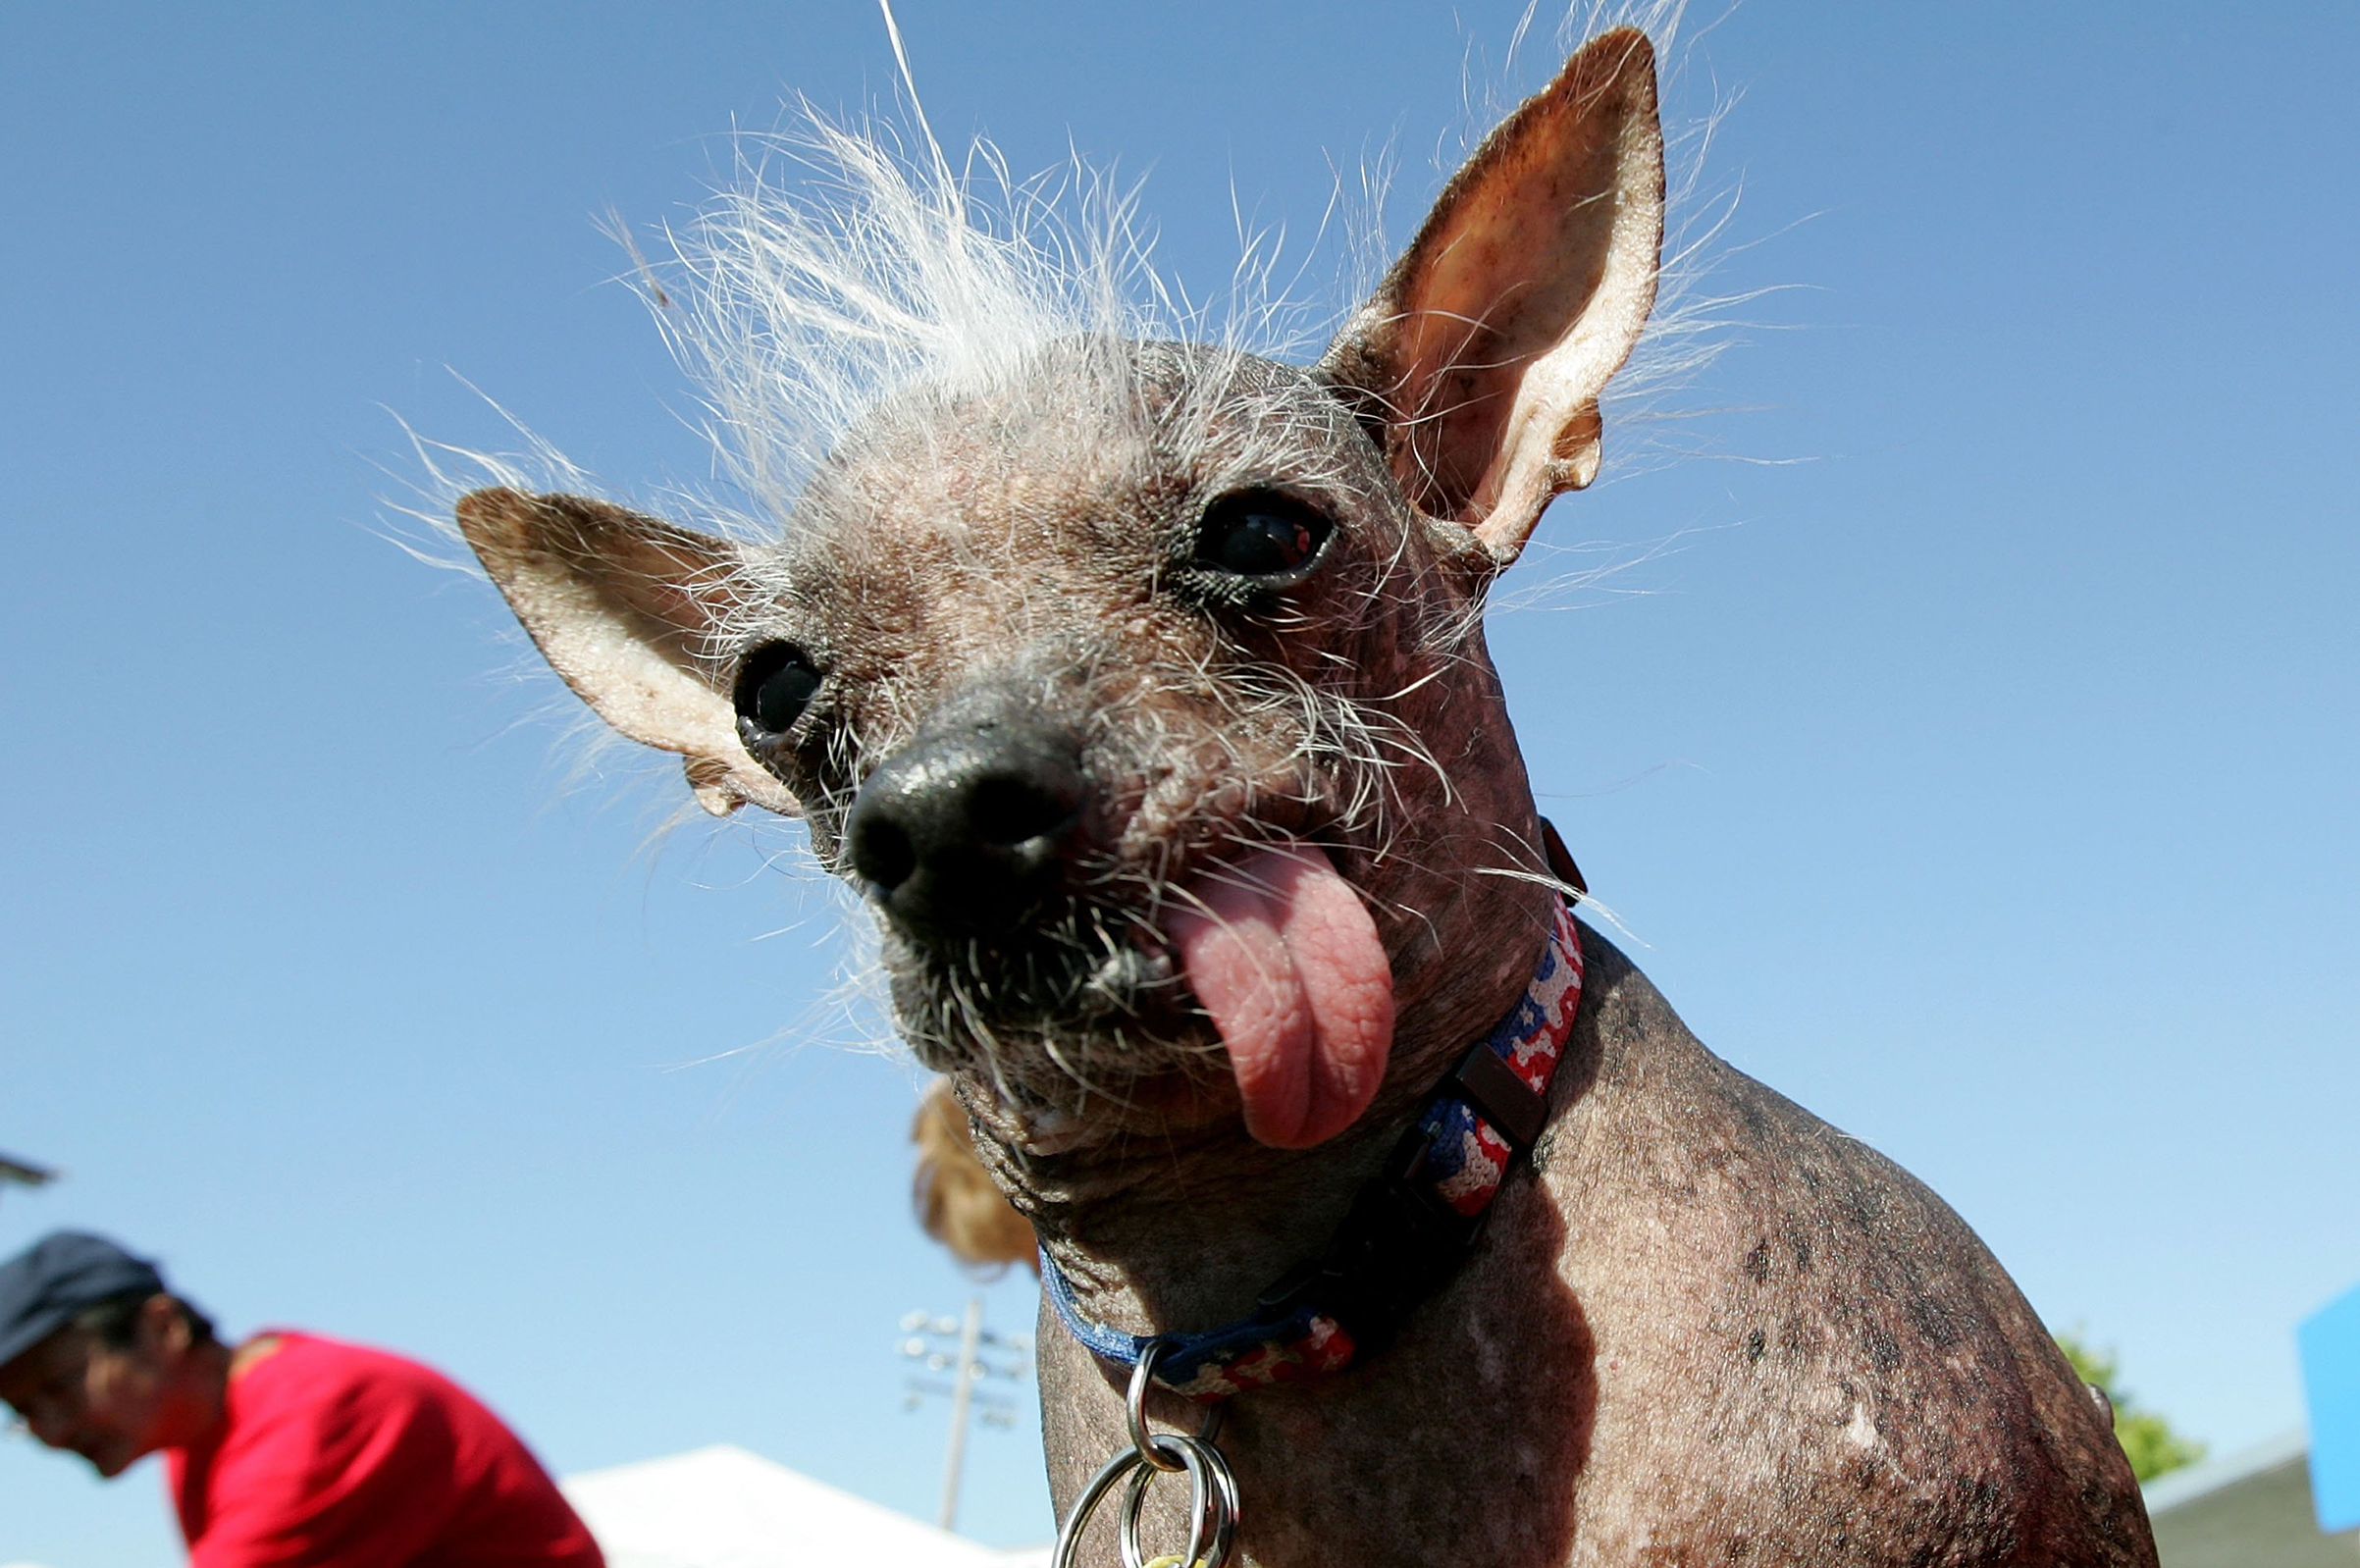 The 2006 World's Ugliest Dog, Archie, a Chinese Crested is seen during the 18th annual World's Ugliest Dog competition June 23, 2006 at the Sonoma-Marin Fair in Petaluma, Calif.